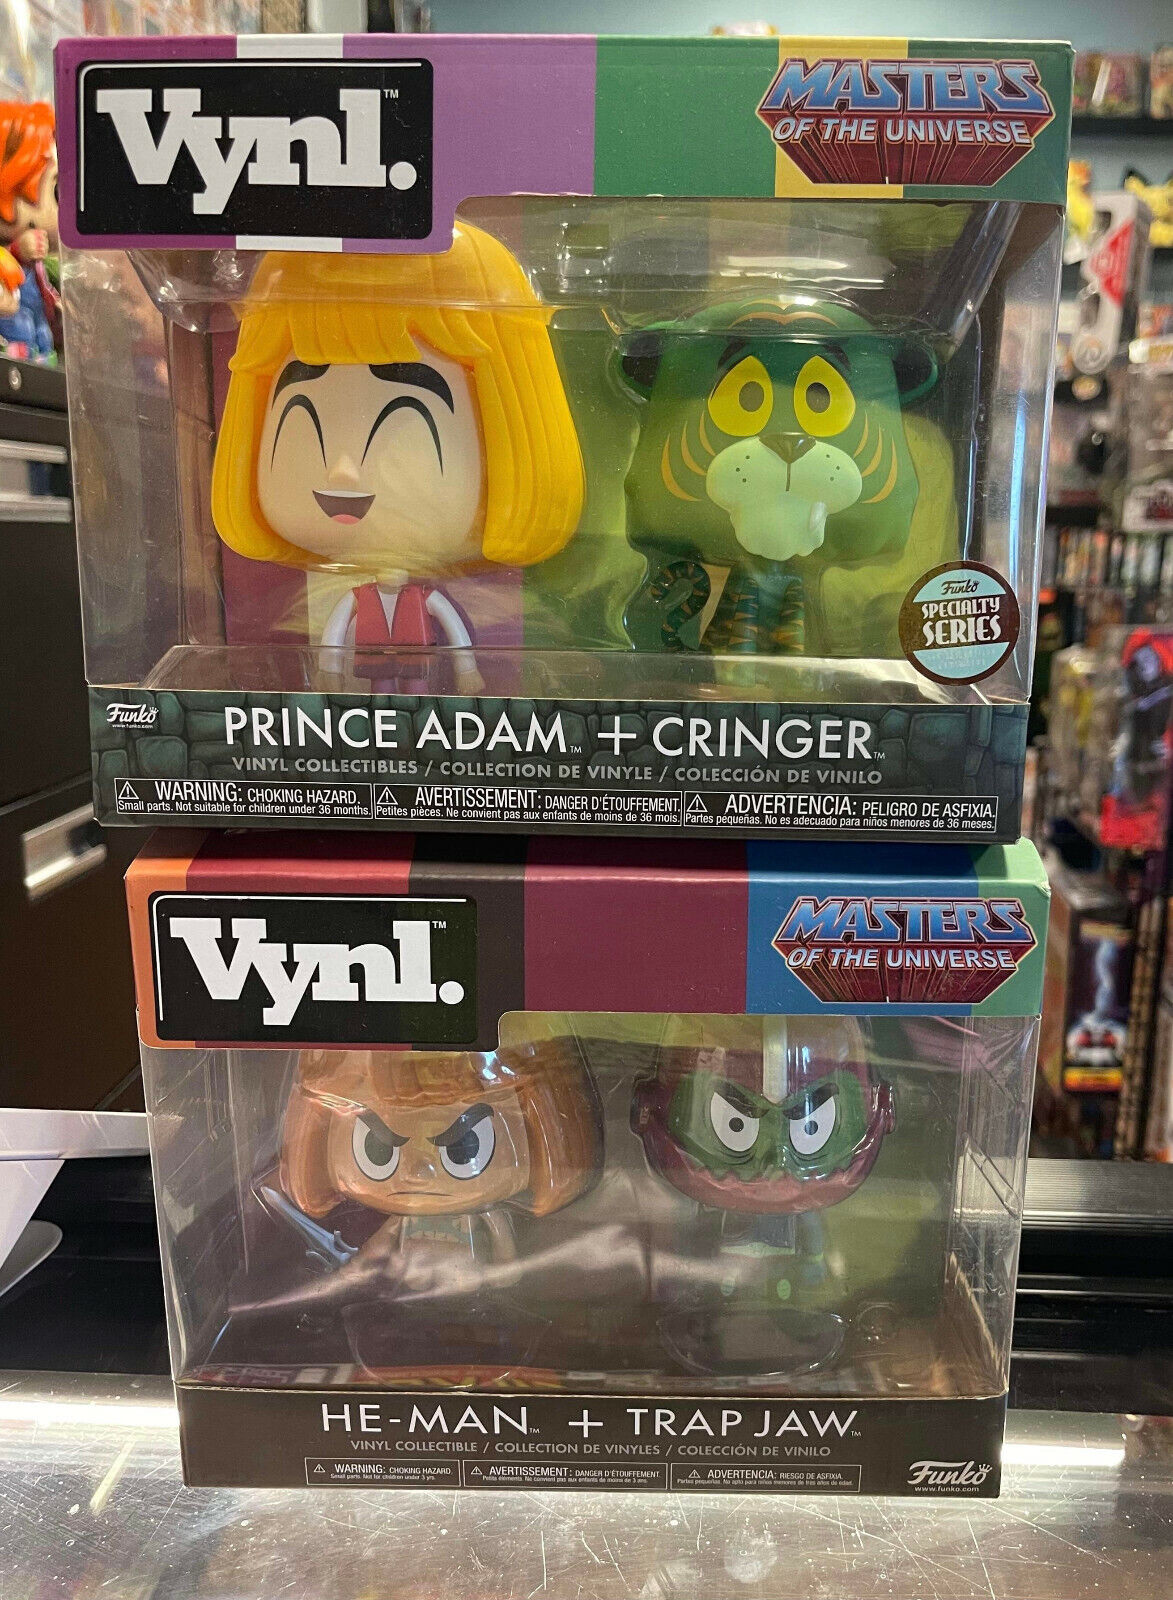 Vynl Masters of the Universe Lot of 2 - Prince Adam - Cringer  He-Man + Trap Jaw